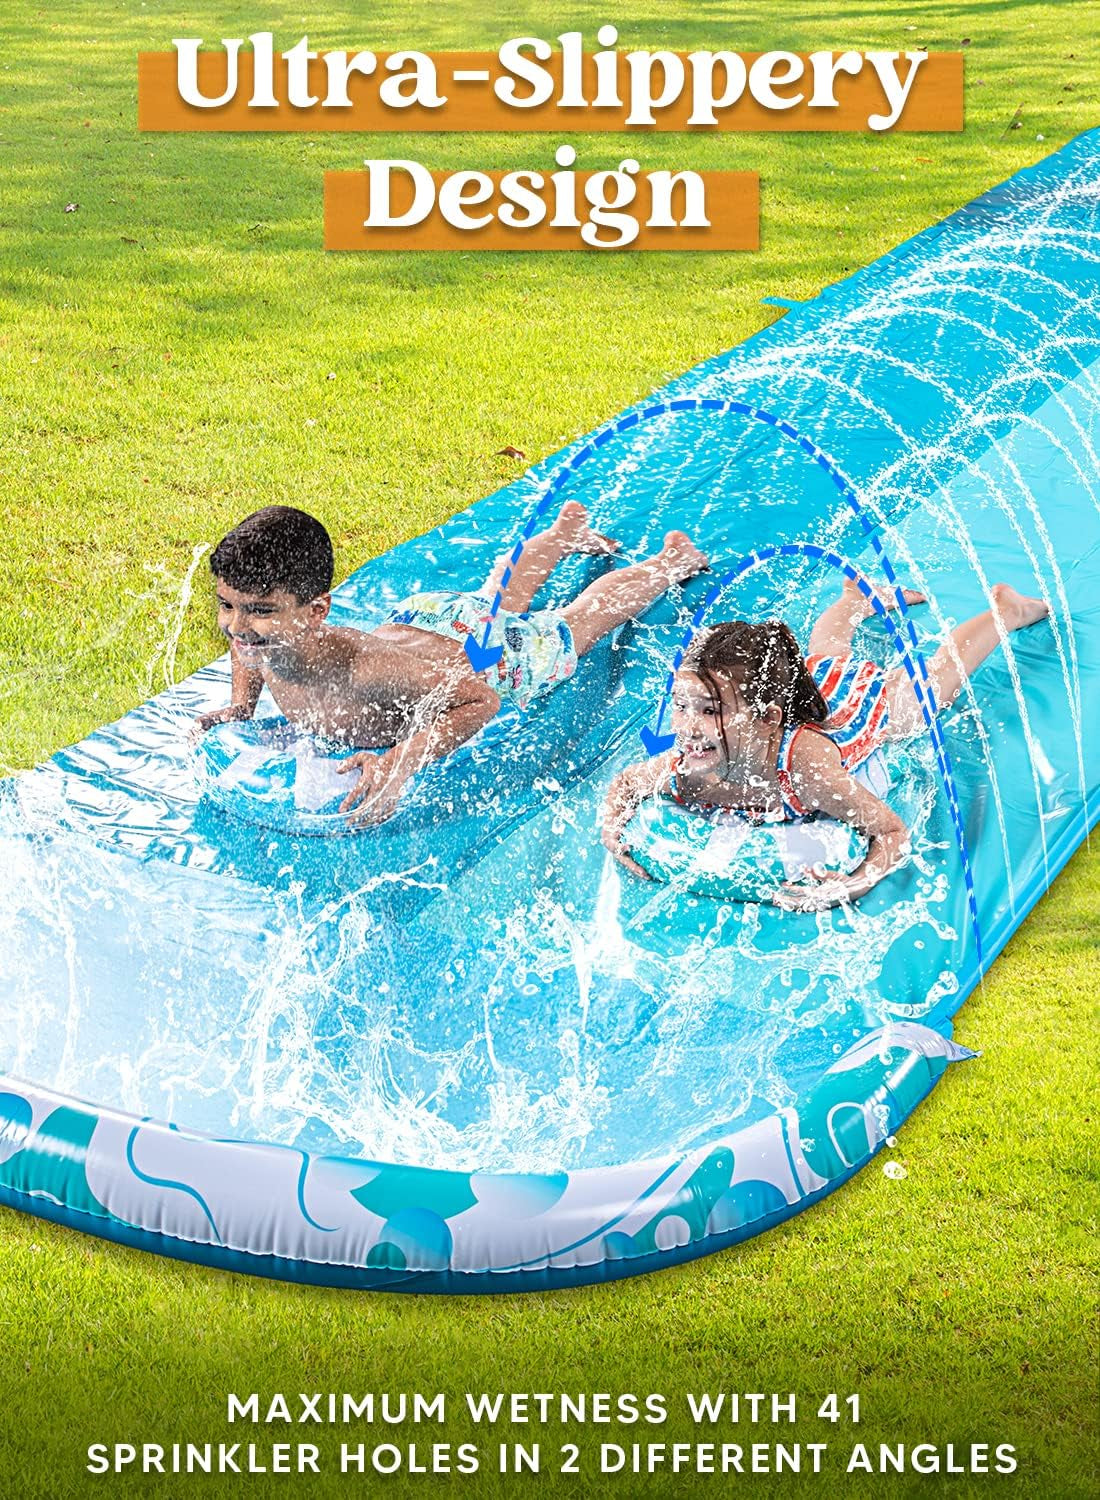 22.5Ft Double Water Slide, Heavy Duty Lawn Water Slide with Sprinkler and 2 Slip Inflatable Boards for Summer Yard Lawn Outdoor Water Play Activities,Light Blue